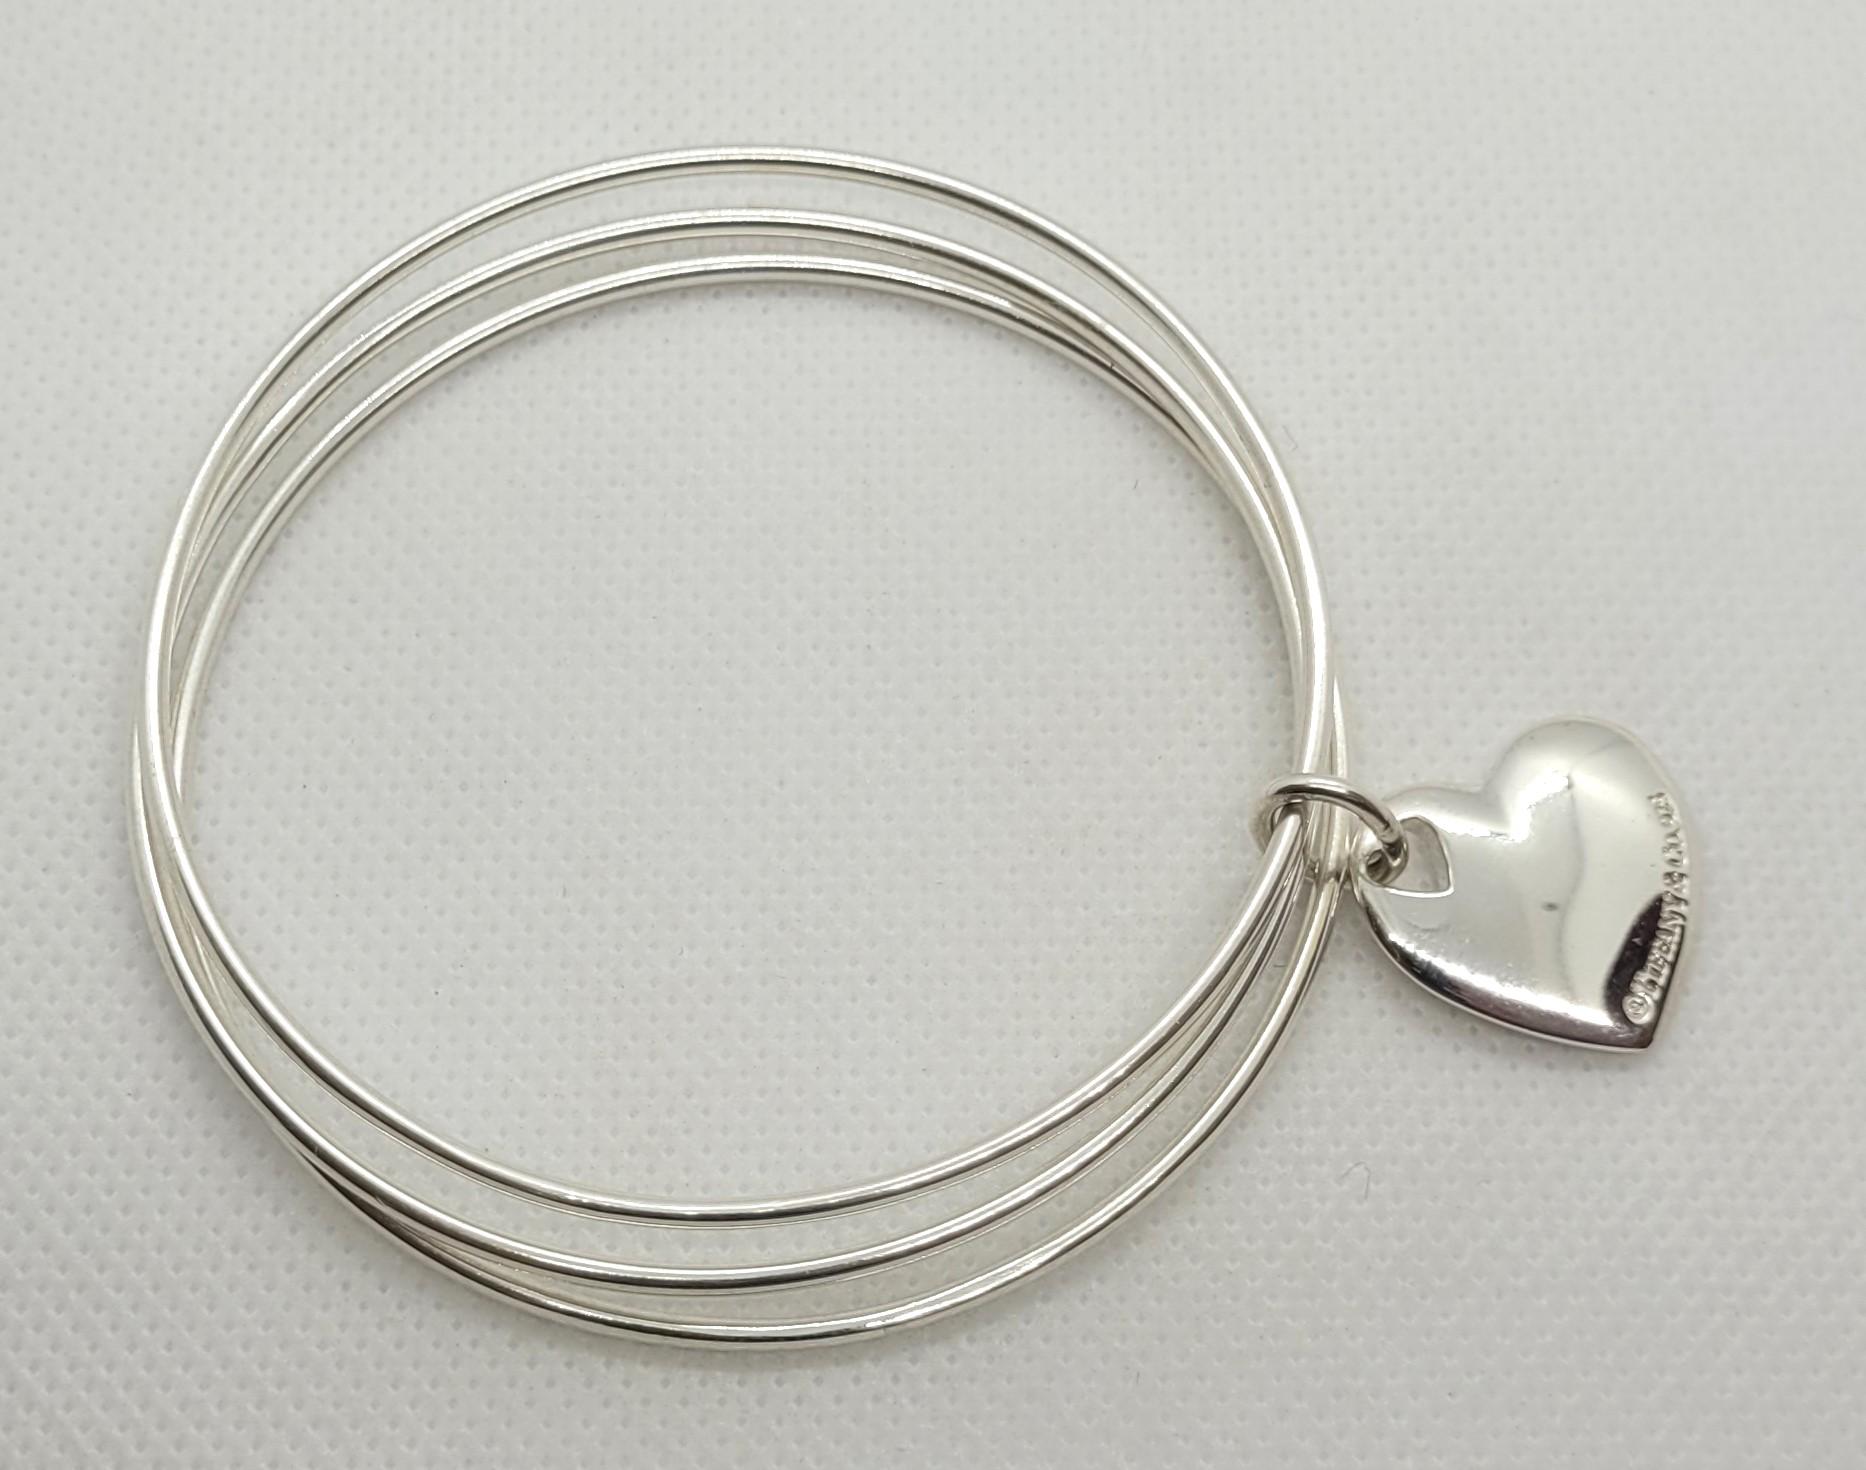 Beautiful Tiffany & Co silver trio bangle bracelet with engravable heart charm. The bracelet is a standard size for average-sized ladies' wrists. The diameter of the three bangles is a total of 2.5+ inches. The width of each bangle is 1.8mm with a